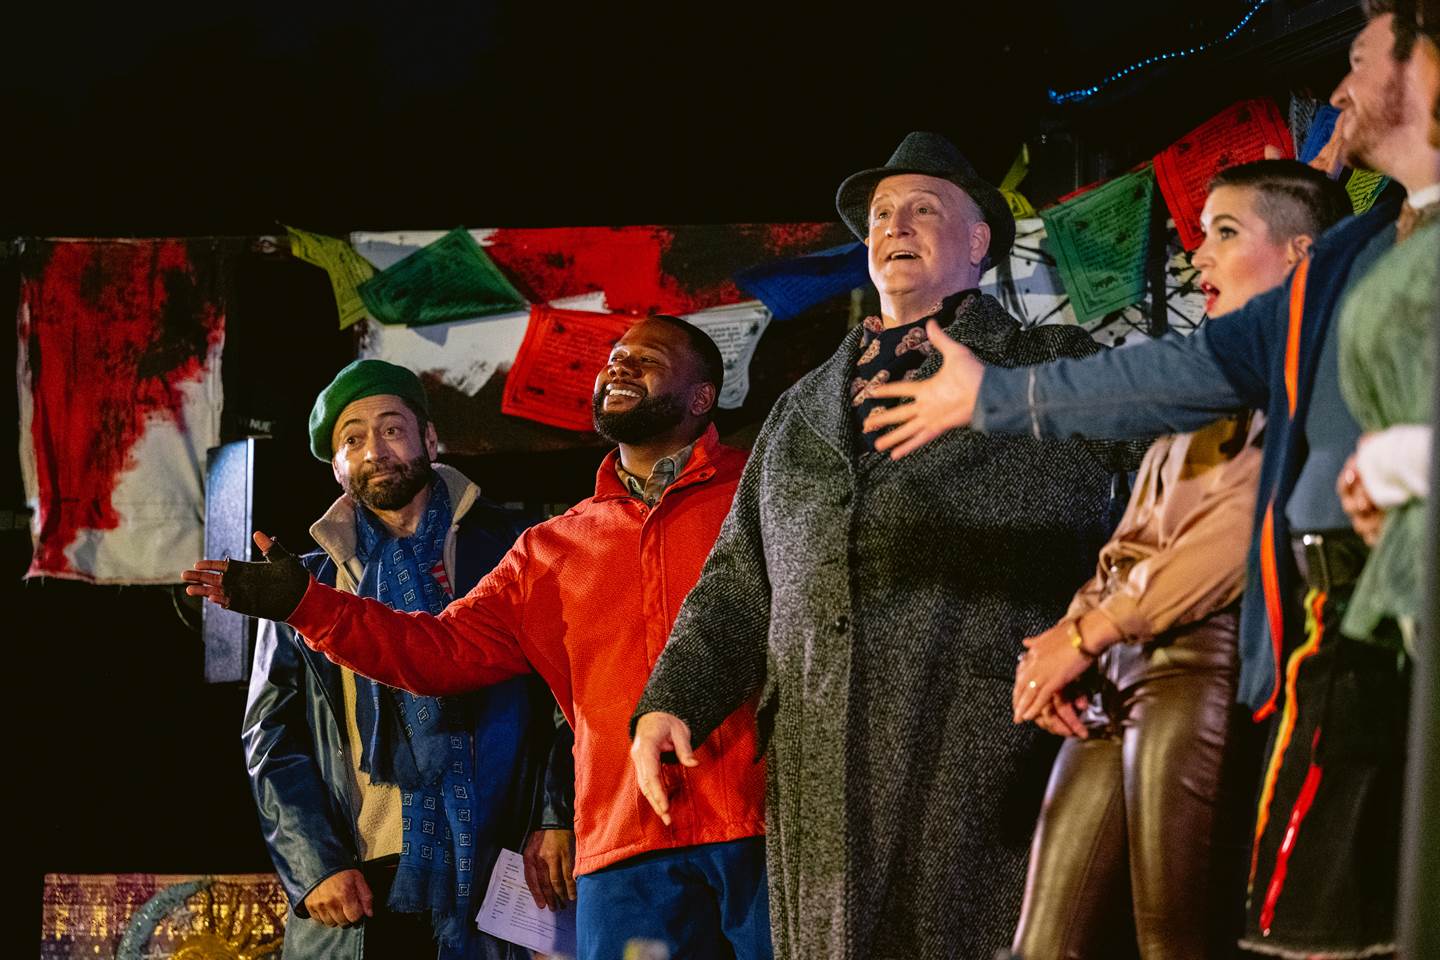 A vibrant group of five people is seen in a joyous pose, possibly in the midst of a theatrical performance. From left to right: a man in a green beanie and blue scarf extends his left arm out, palm up, with a facial expression of whimsical explanation. Next to him, a man in a bright red jacket smiles broadly, looking up and to his right with his left hand outstretched and fingers splayed. Beside him, an older gentleman in a gray hat and overcoat with a textured scarf gestures grandly with his right hand, as if emphasizing a point, his mouth open mid-speech. Next is a person with short hair and bold red lipstick, dressed in a brown coat and black pants with a multicolored stripe down the side; their right arm reaches out as if to grab someone&#39;s attention. Finally, a man on the far right wears a green jacket and scarf, with his hands clasped together in front of him. They stand before a background adorned with colorful prayer flags and various papers. The atmosphere is one of camaraderie and lively interaction.